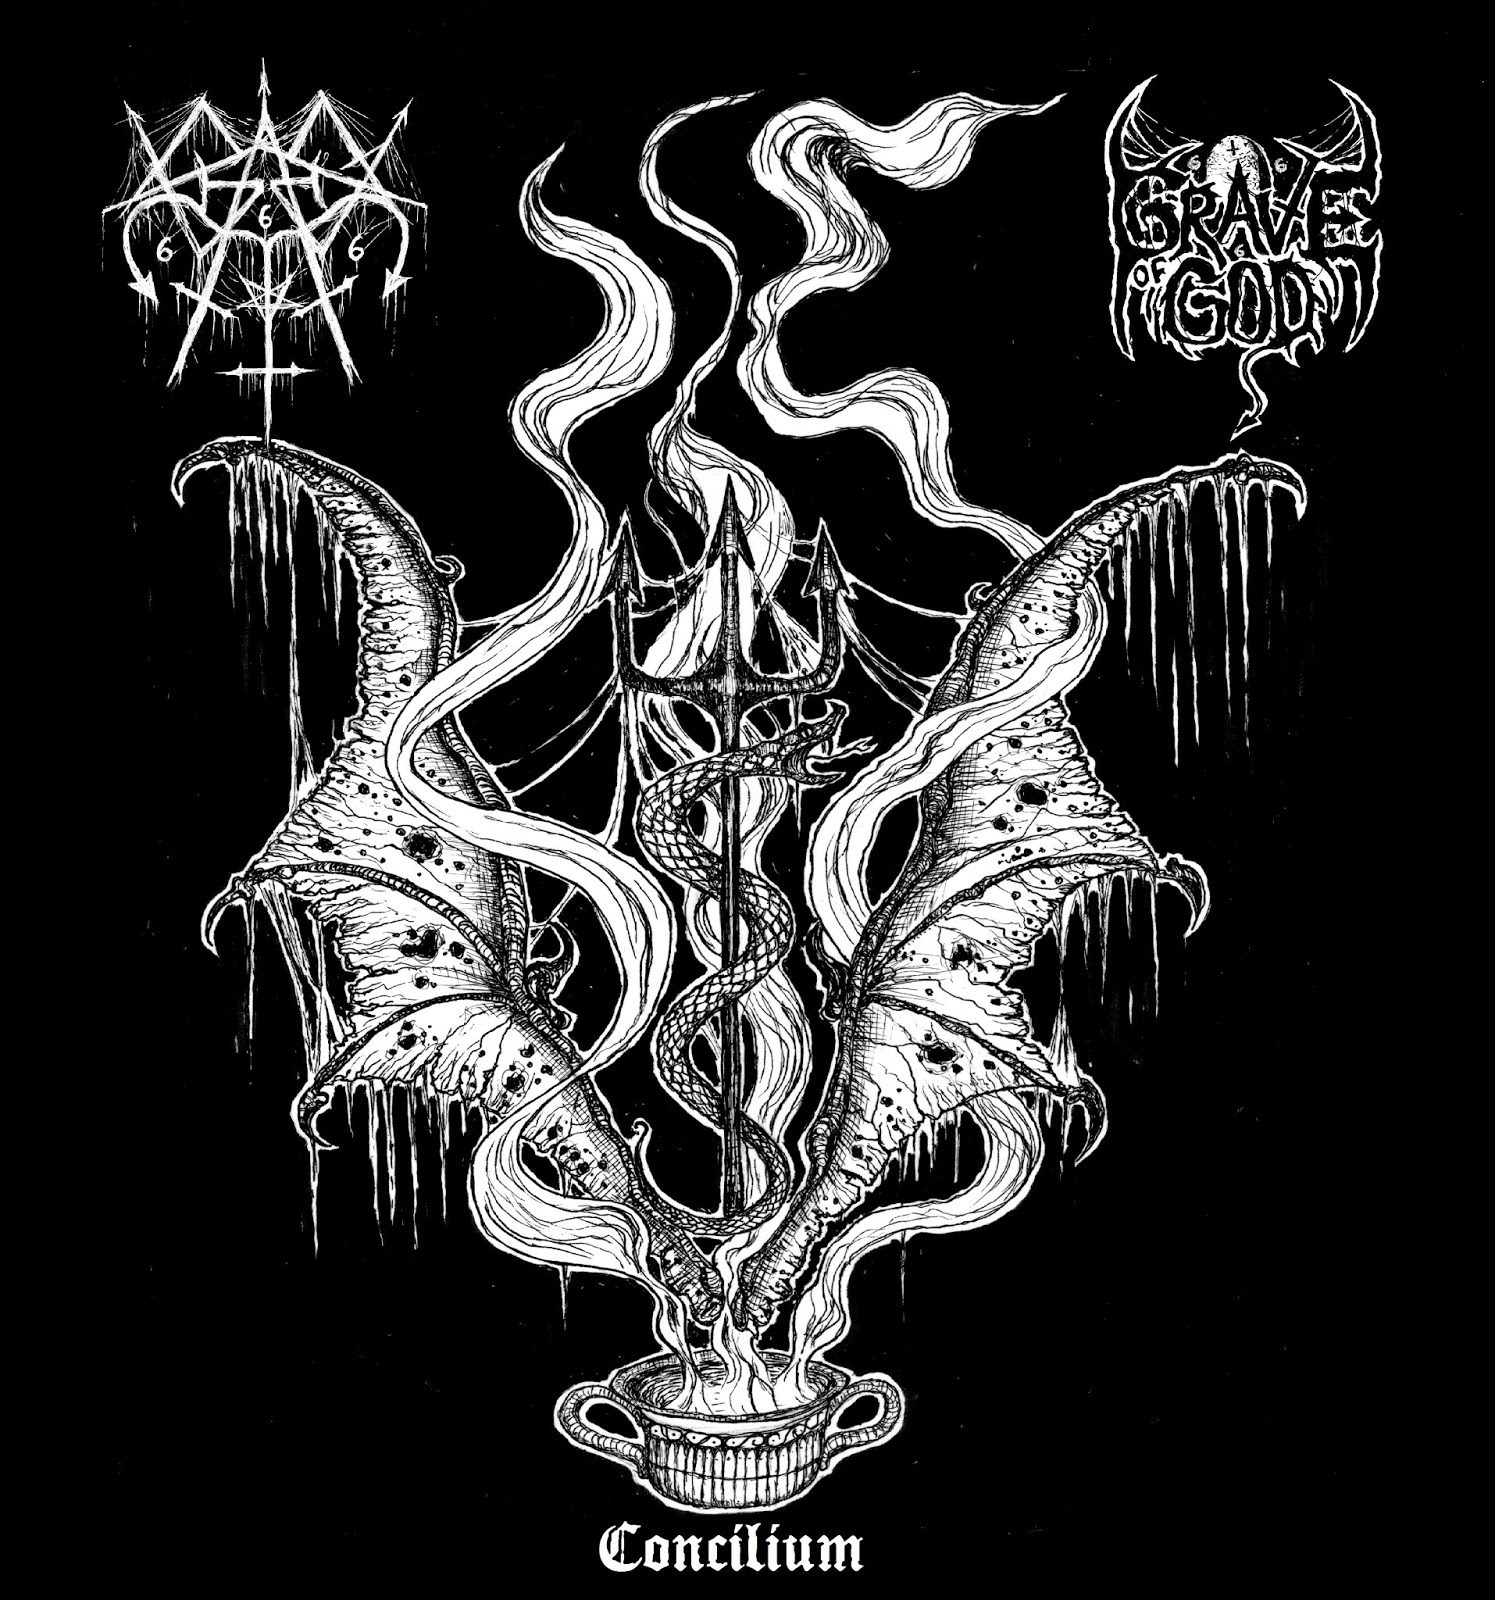 Grave god. Archgoat. Aosoth - IV. Gravespawn Metal Band. Aosoth - IV - an arrow in Heart.